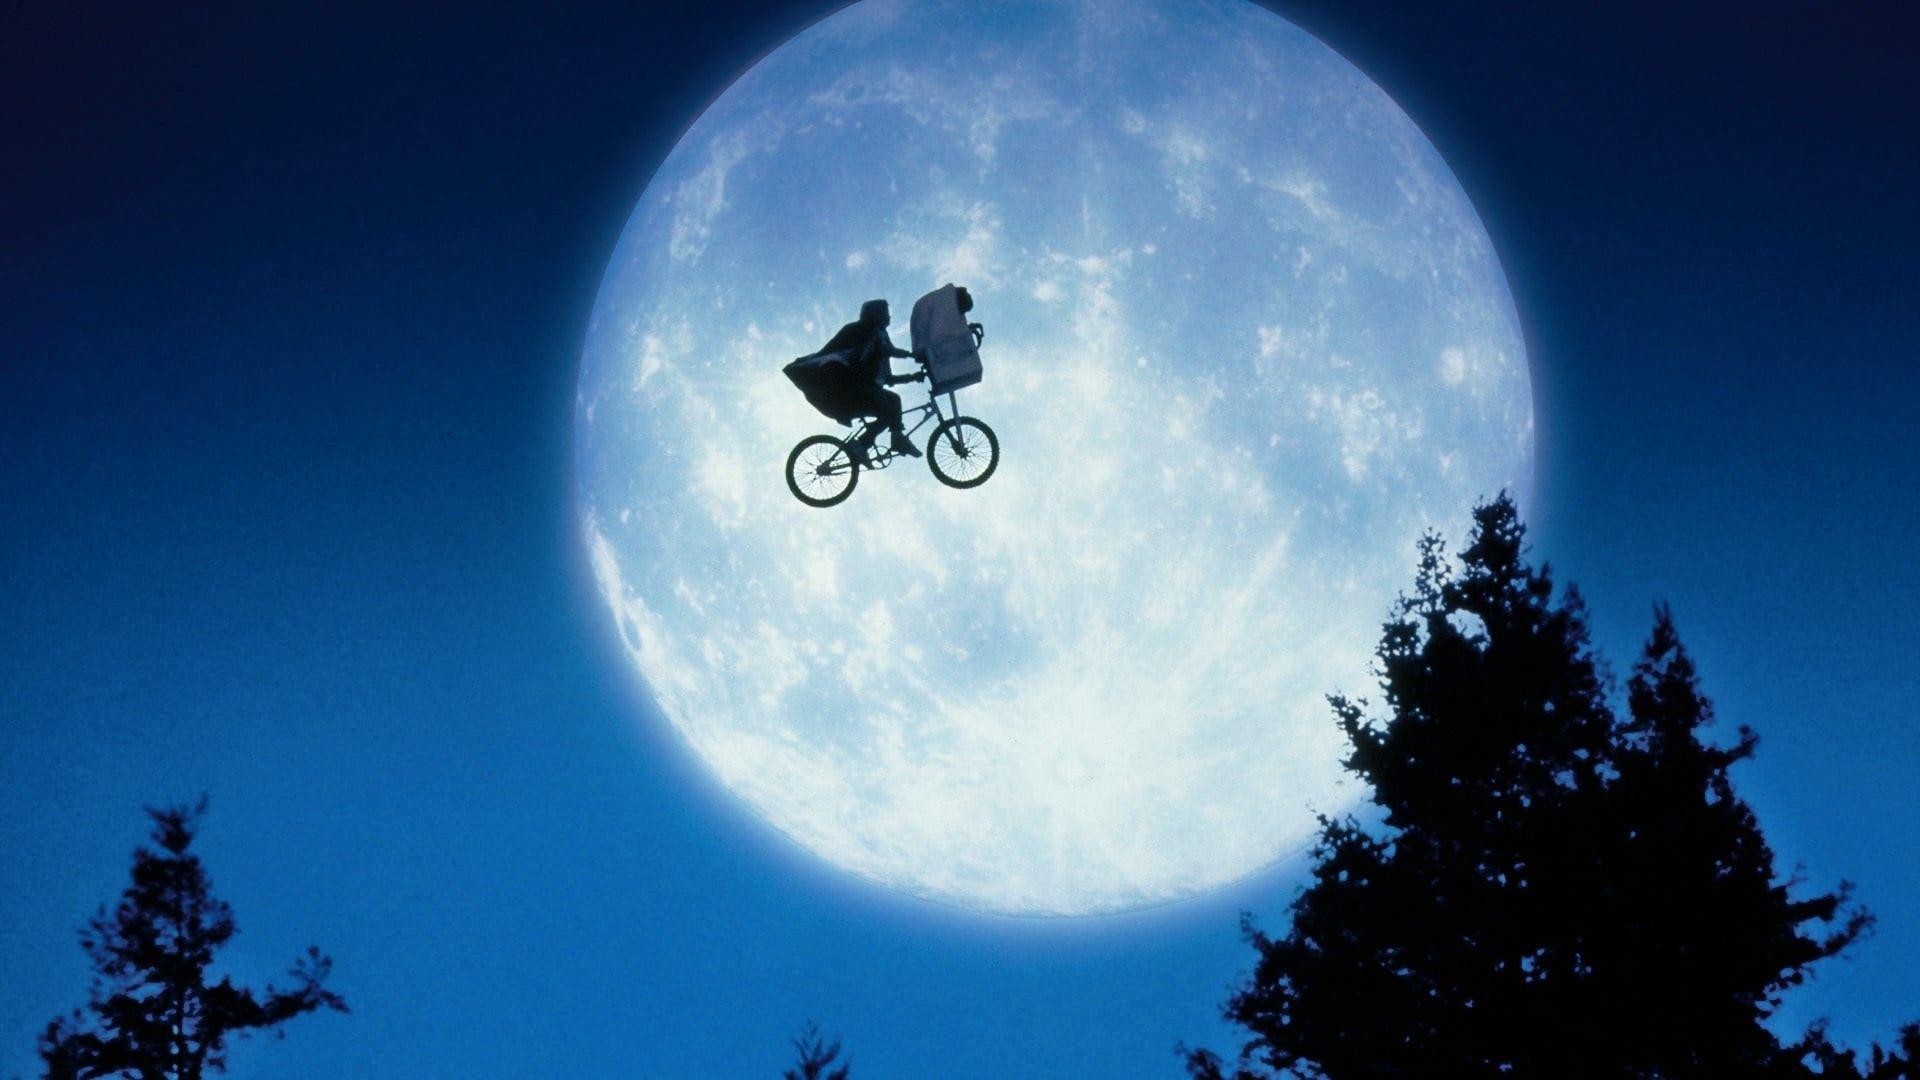 for mac download E.T. the Extra-Terrestrial